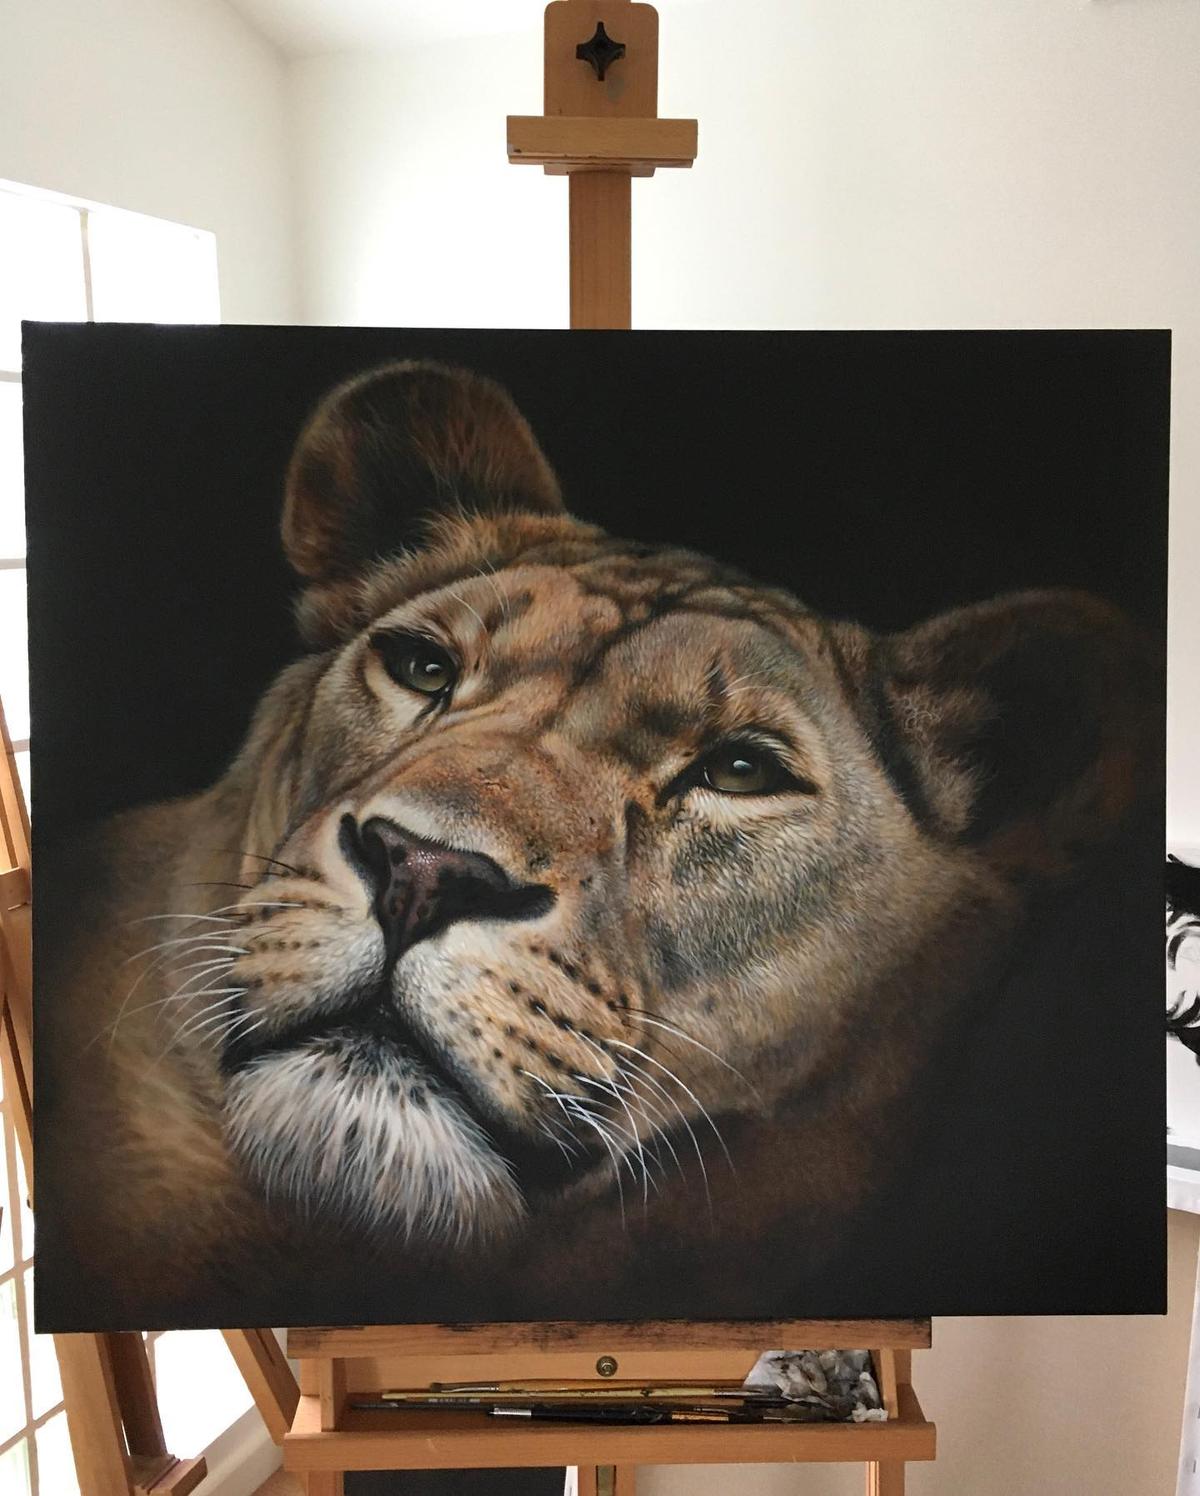 Acrylic painting of a lioness by Julie Rhodes. (Courtesy of <a href="https://www.julierhodes.com/">Julie Rhodes</a>)